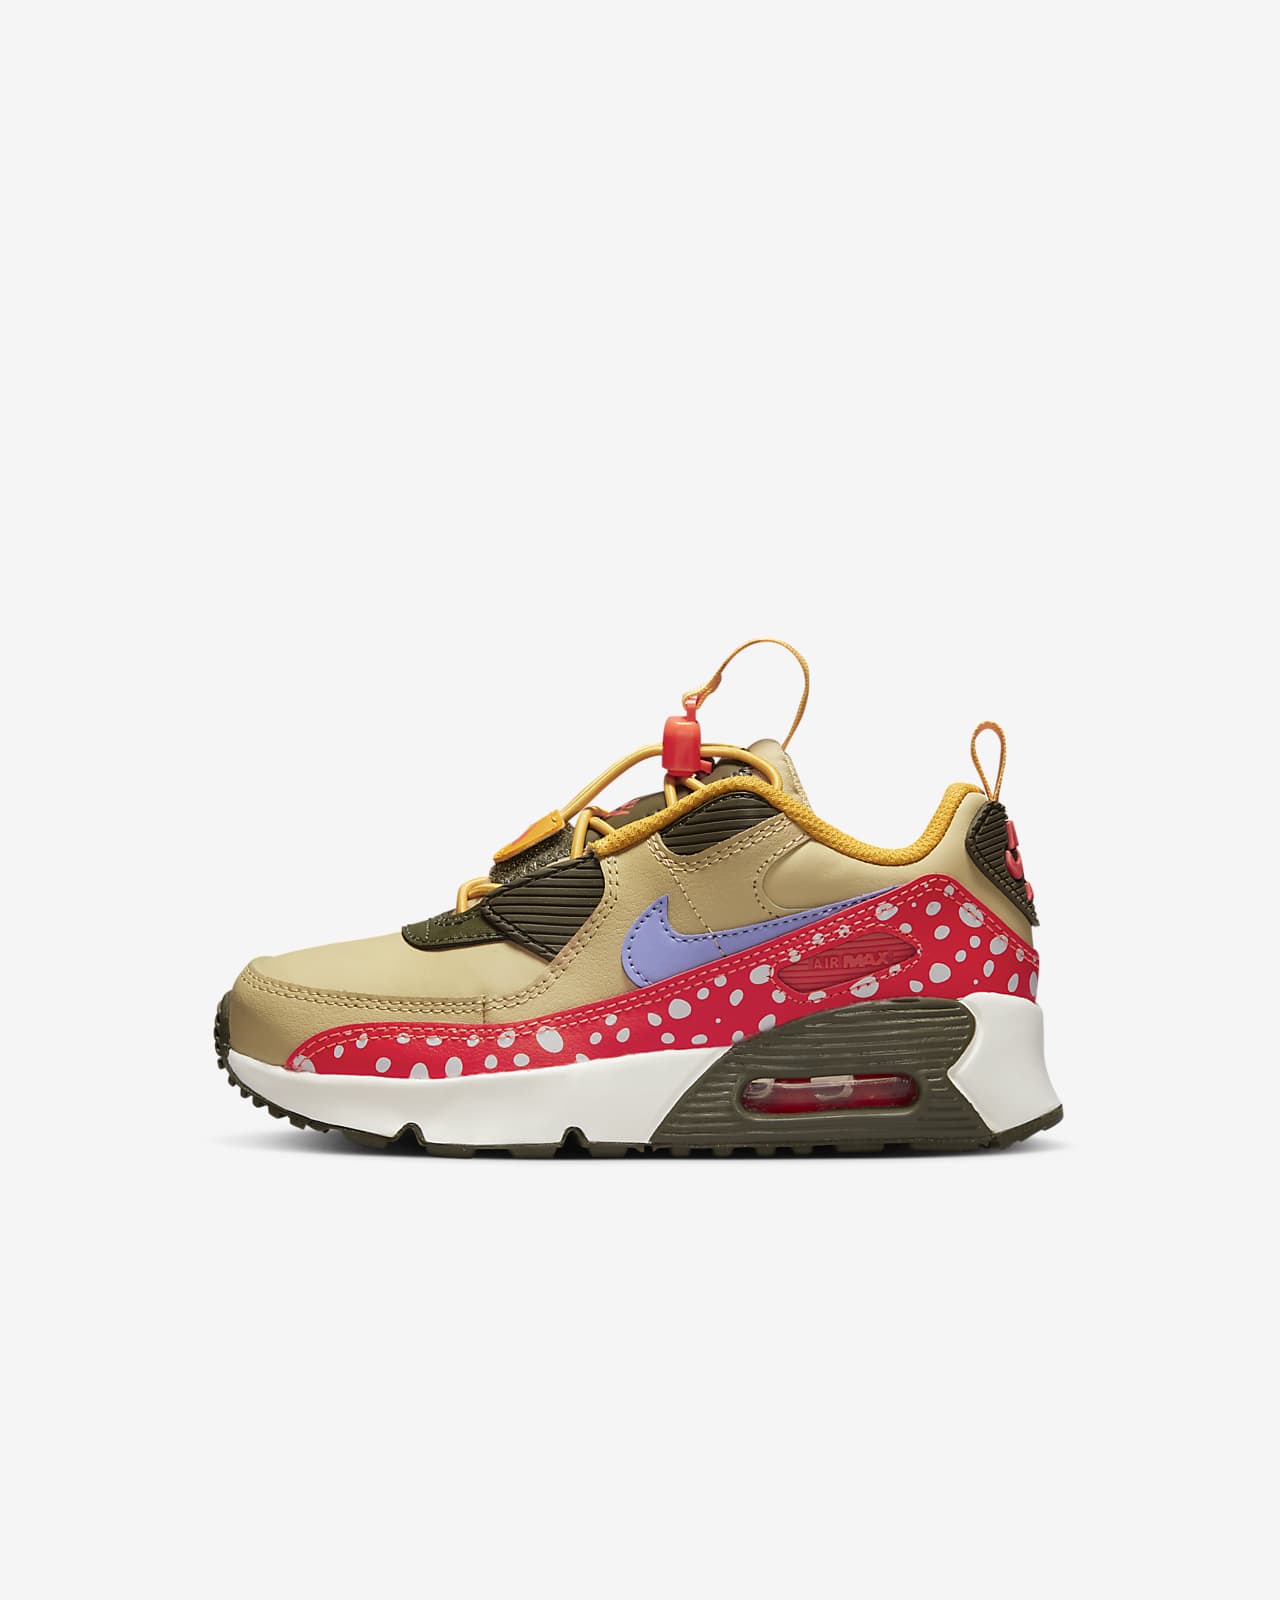 Nike Air Max 90 Toggle SE Younger Kids' Shoes